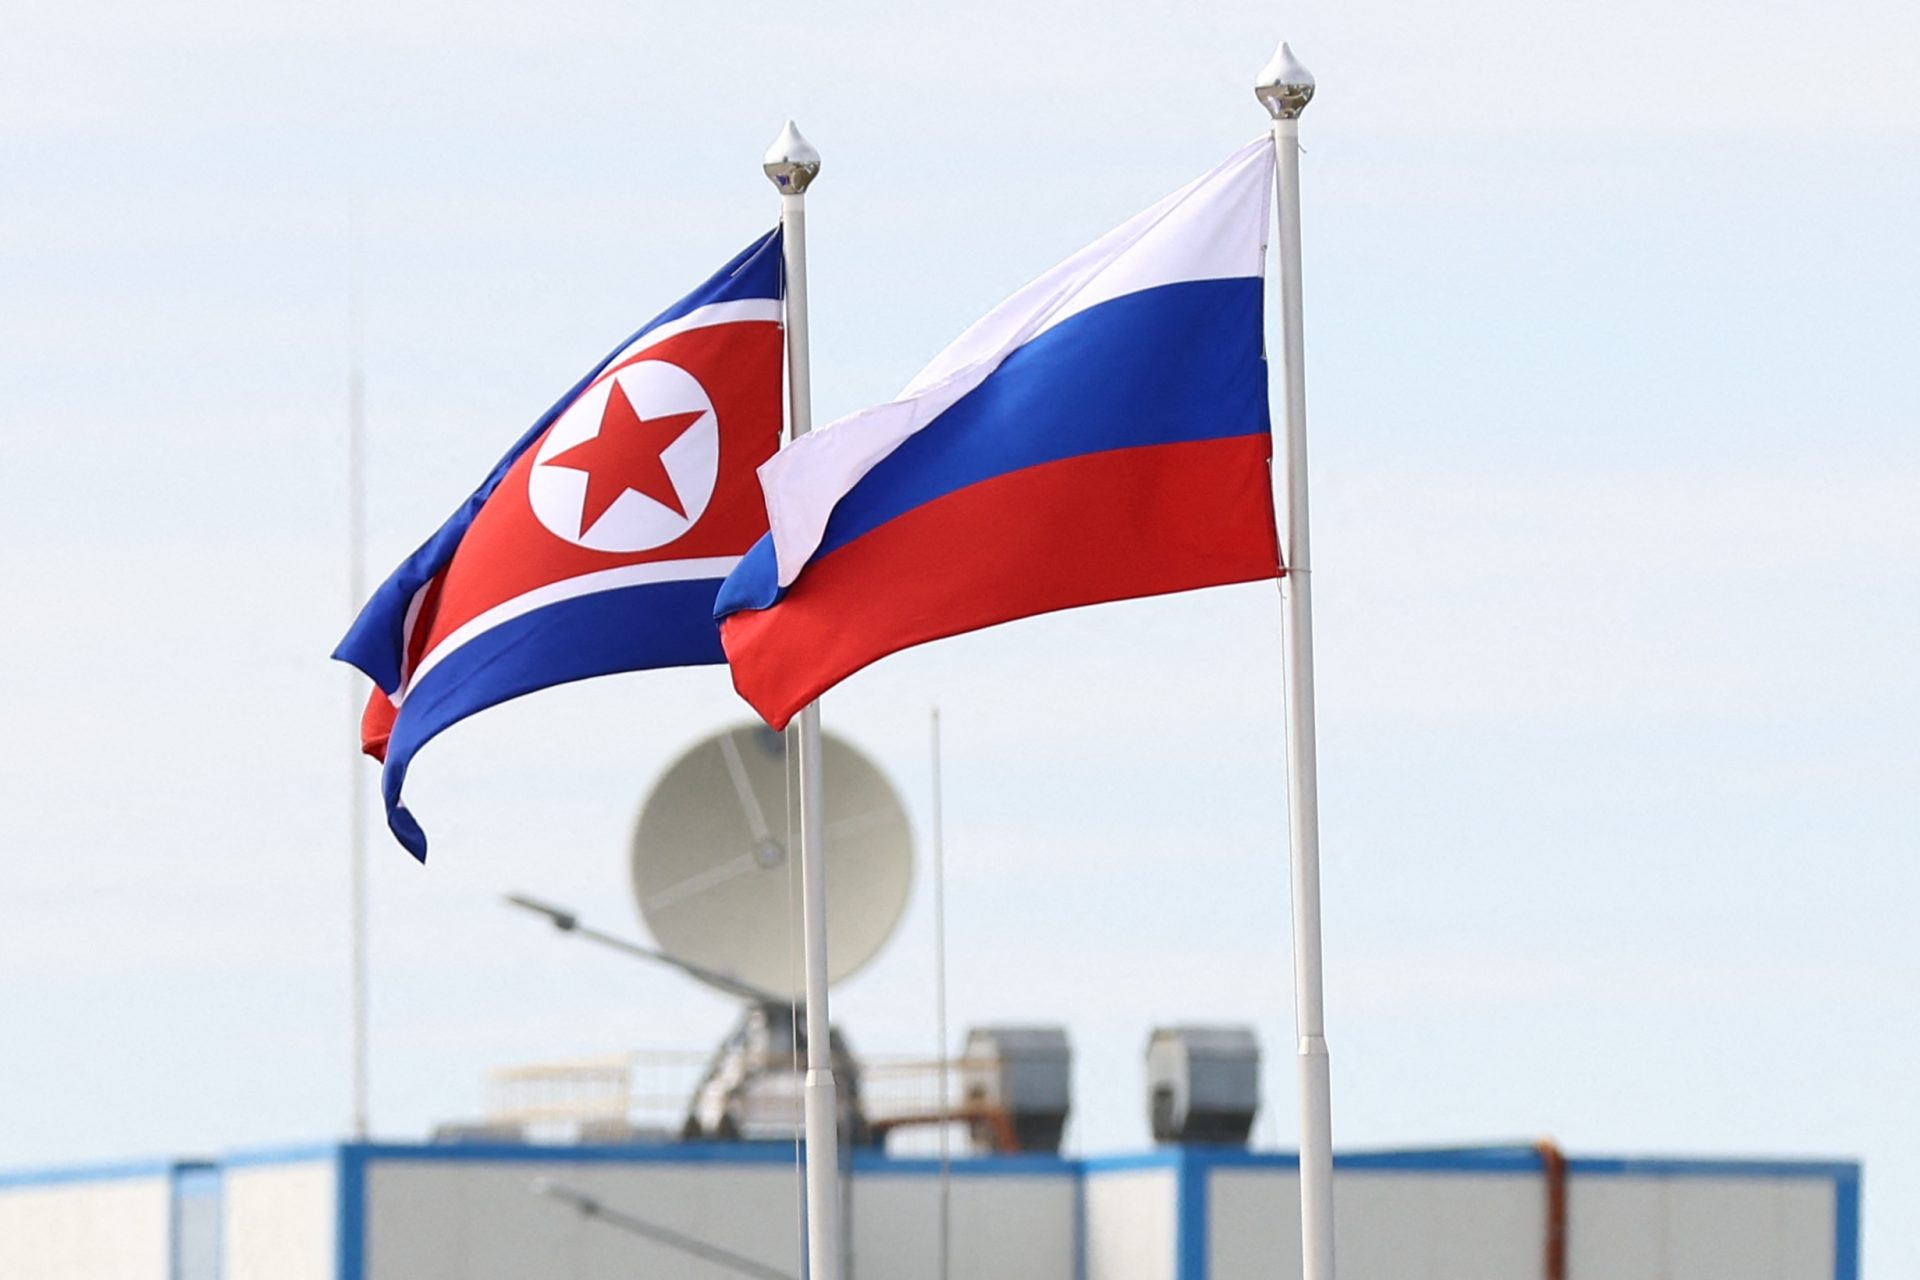 North Korea allegedly halted shipping artillery shells to Russia